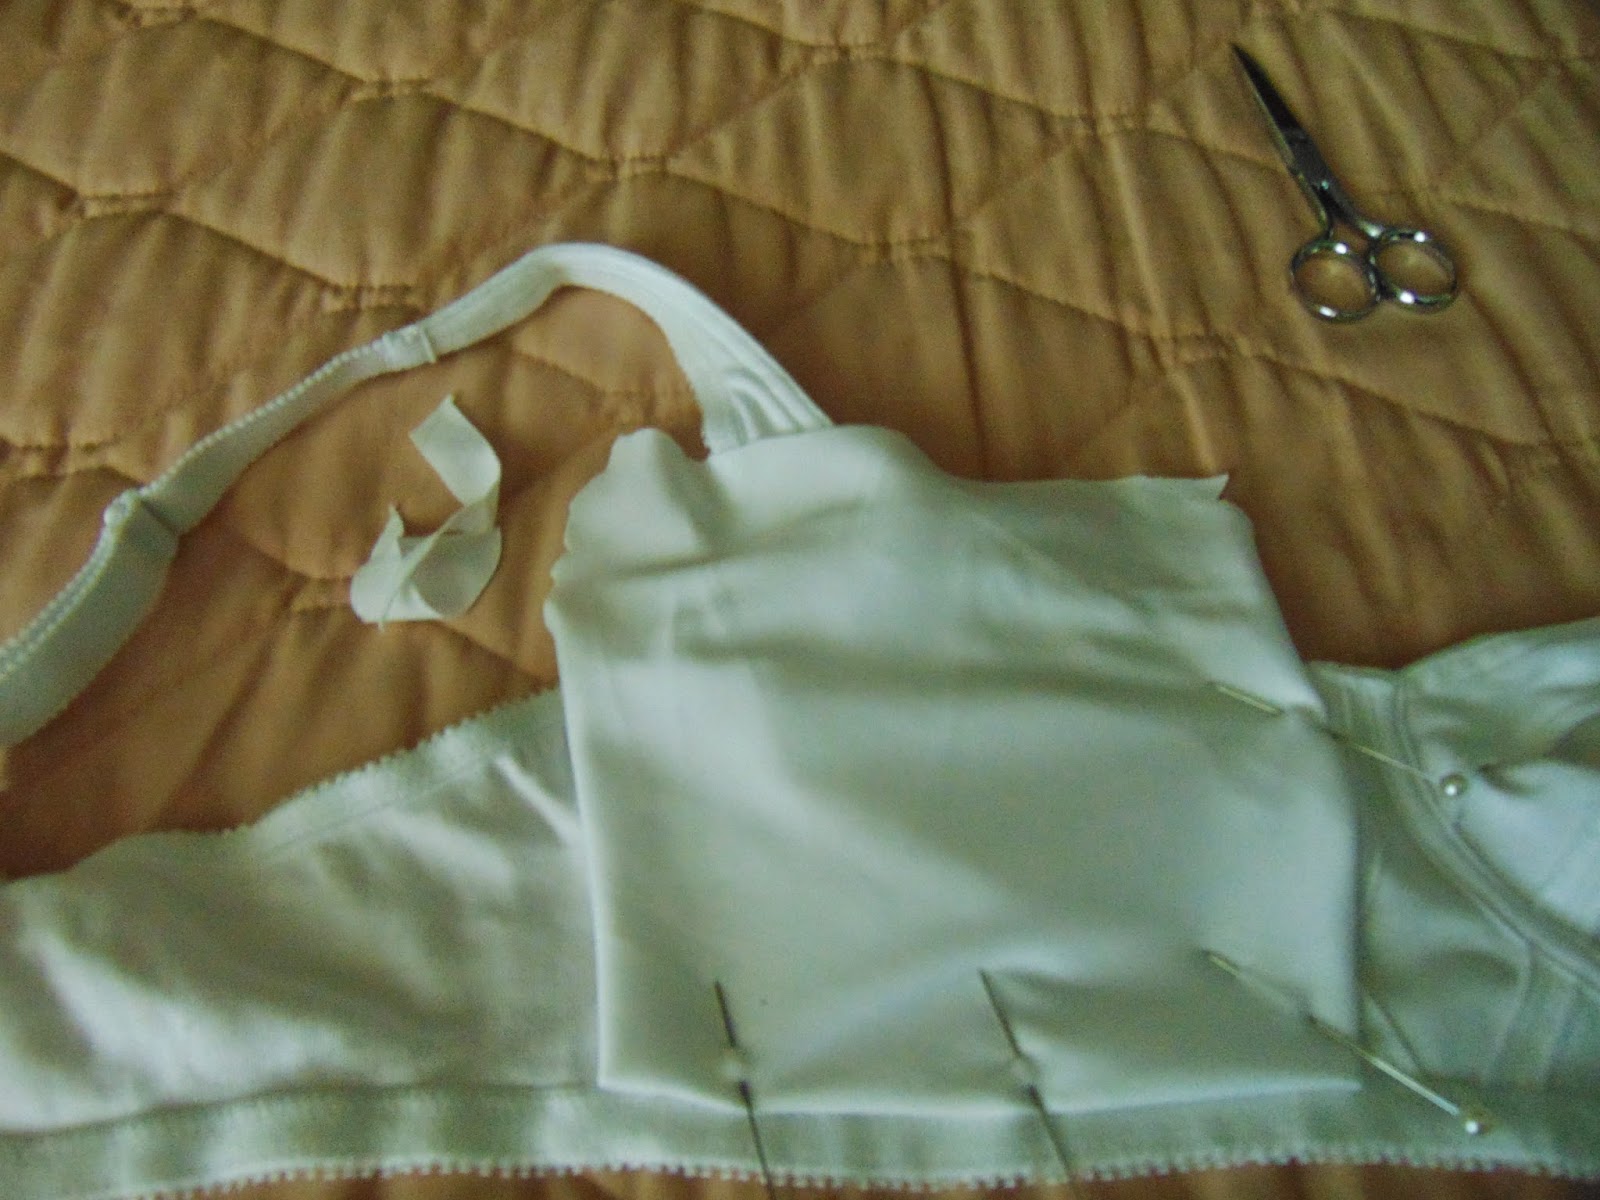 Bra with fabric pinned at center and bottom edge